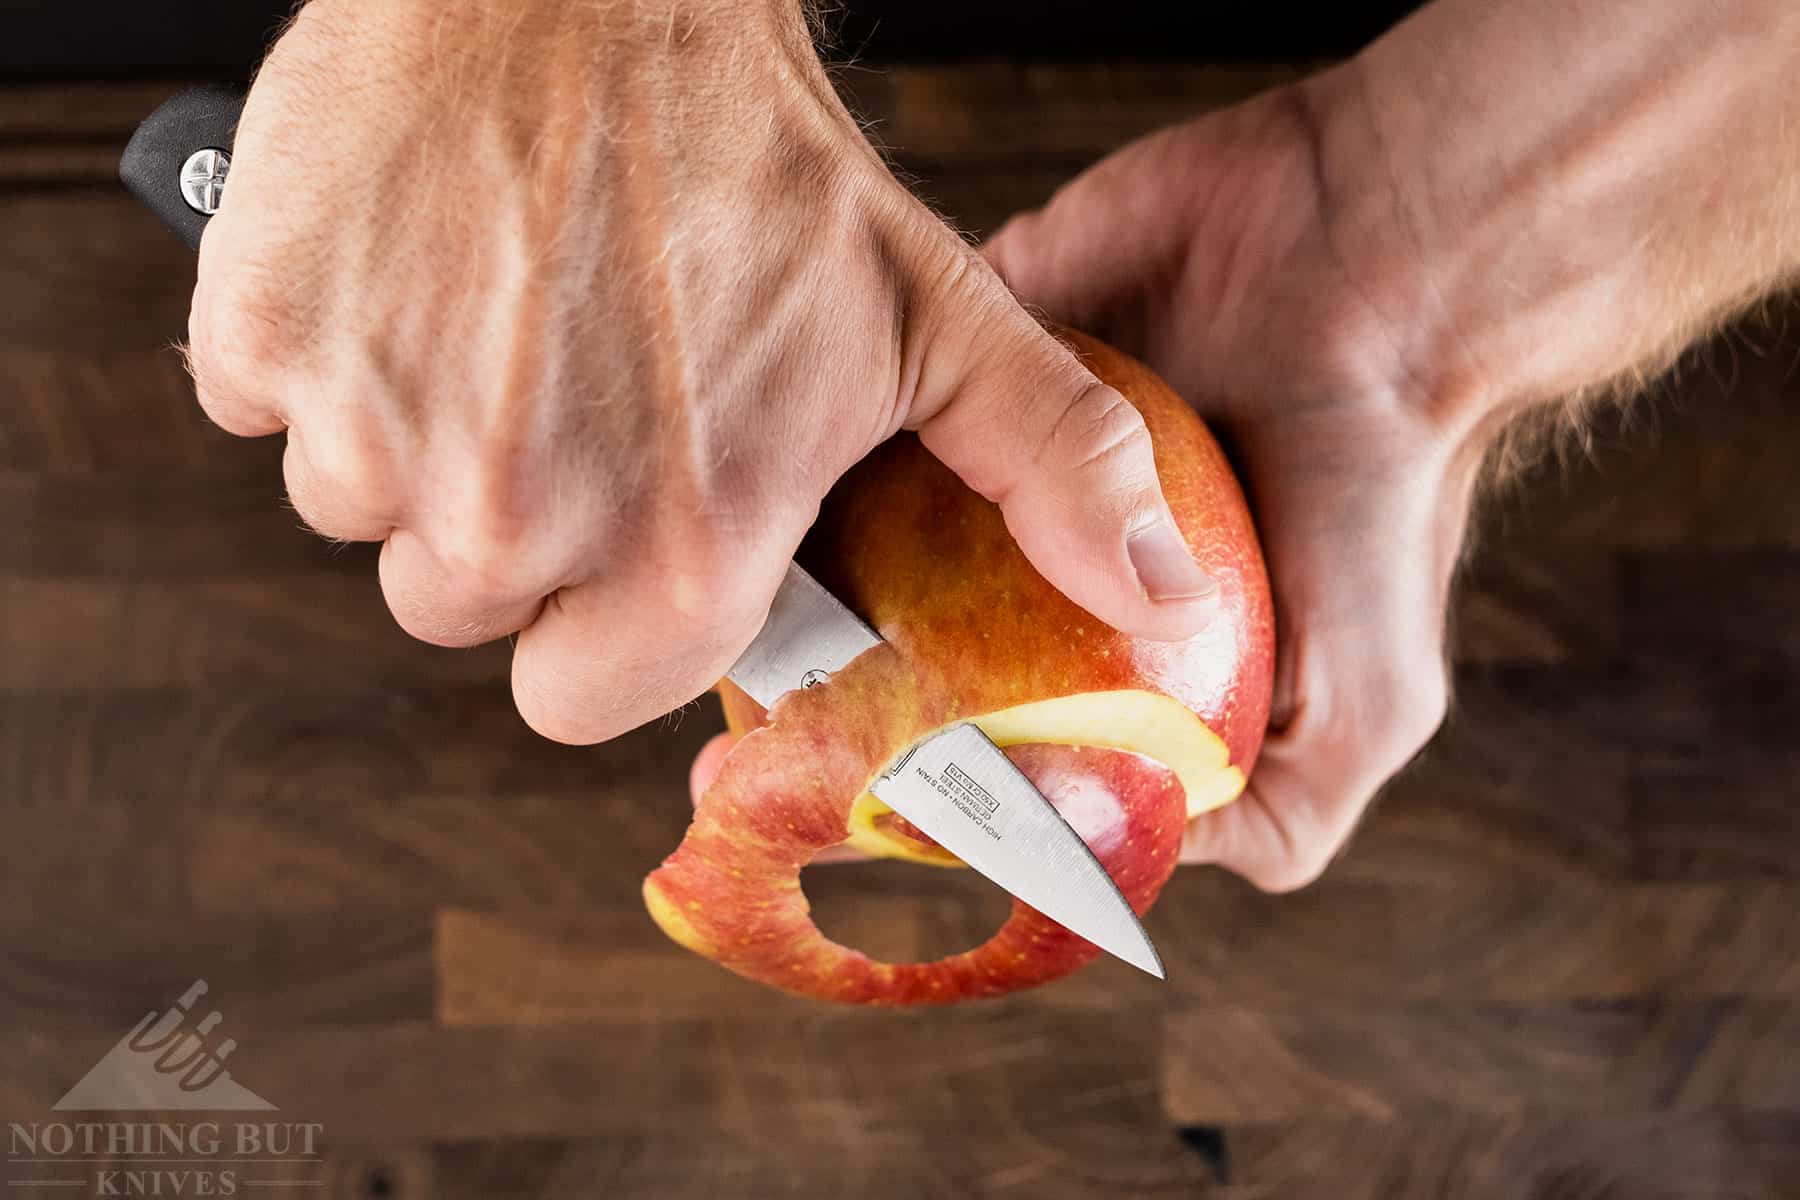 The 3.5 inch Mercer Culinary Genesis paring knife is great for peeling or coring. 